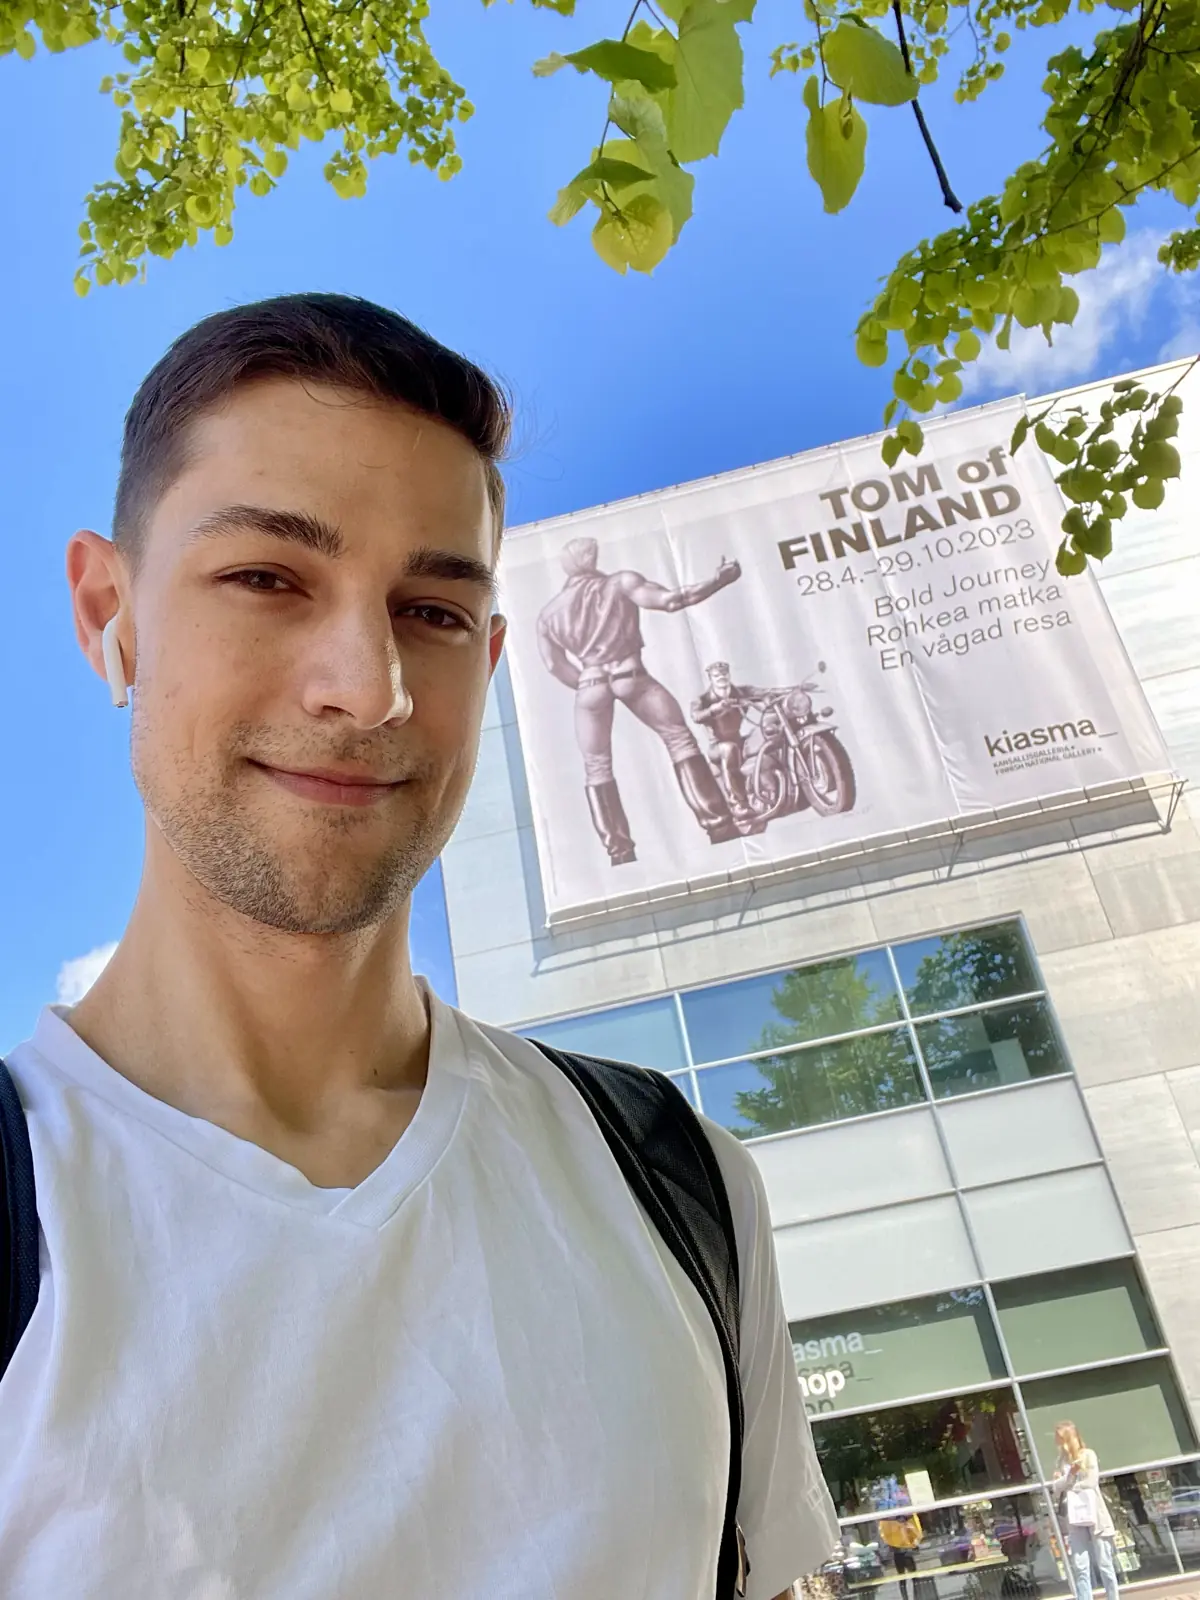 Jeremiah in front of the Tom of Finland exhibit sign on the museum